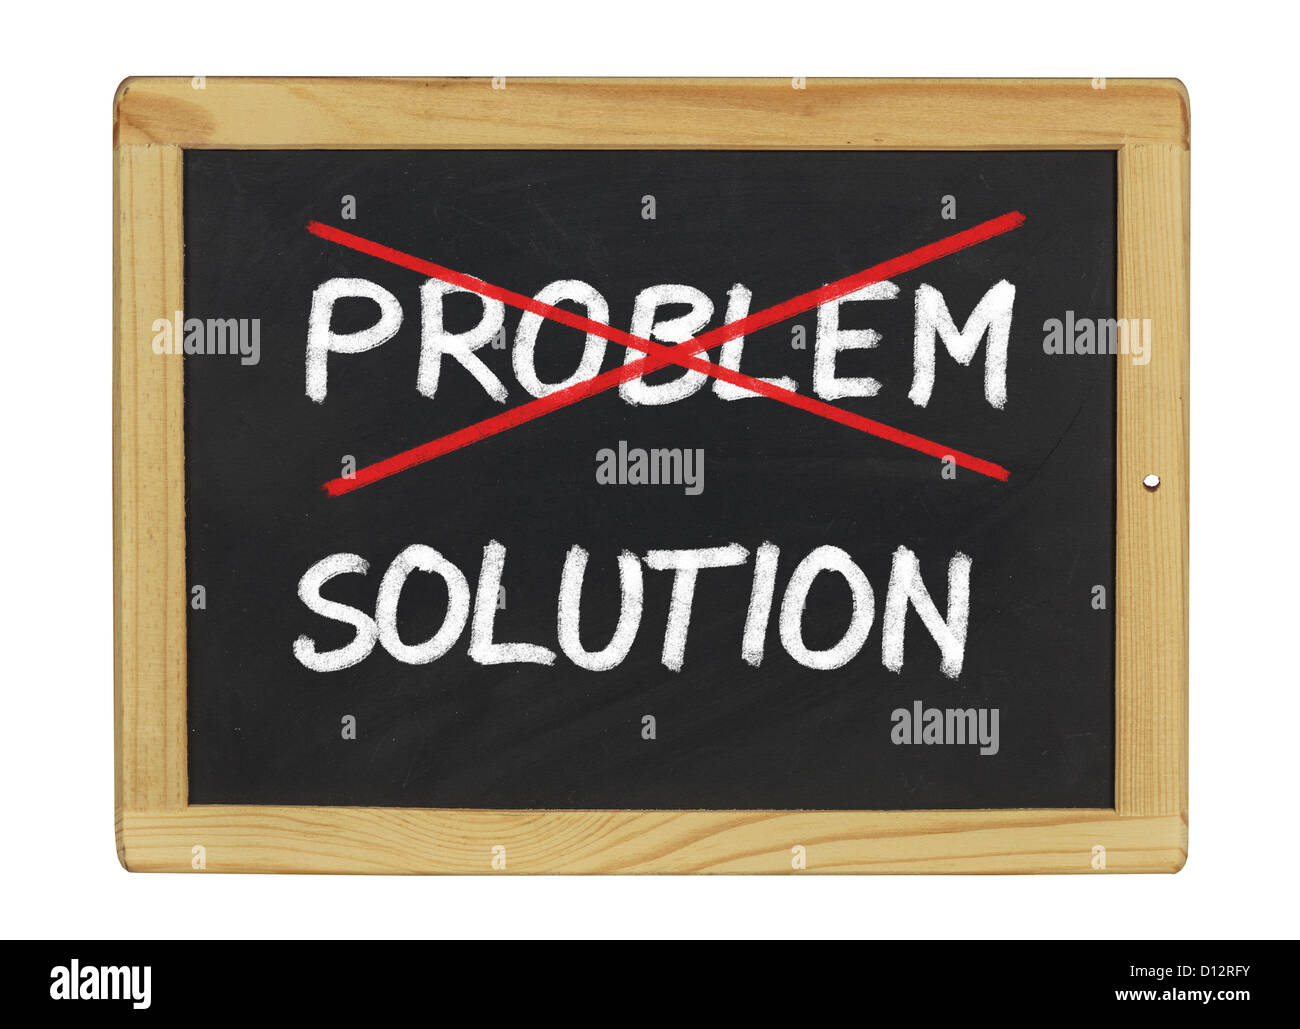 Solution for a problem written on a blackboard Stock Photo